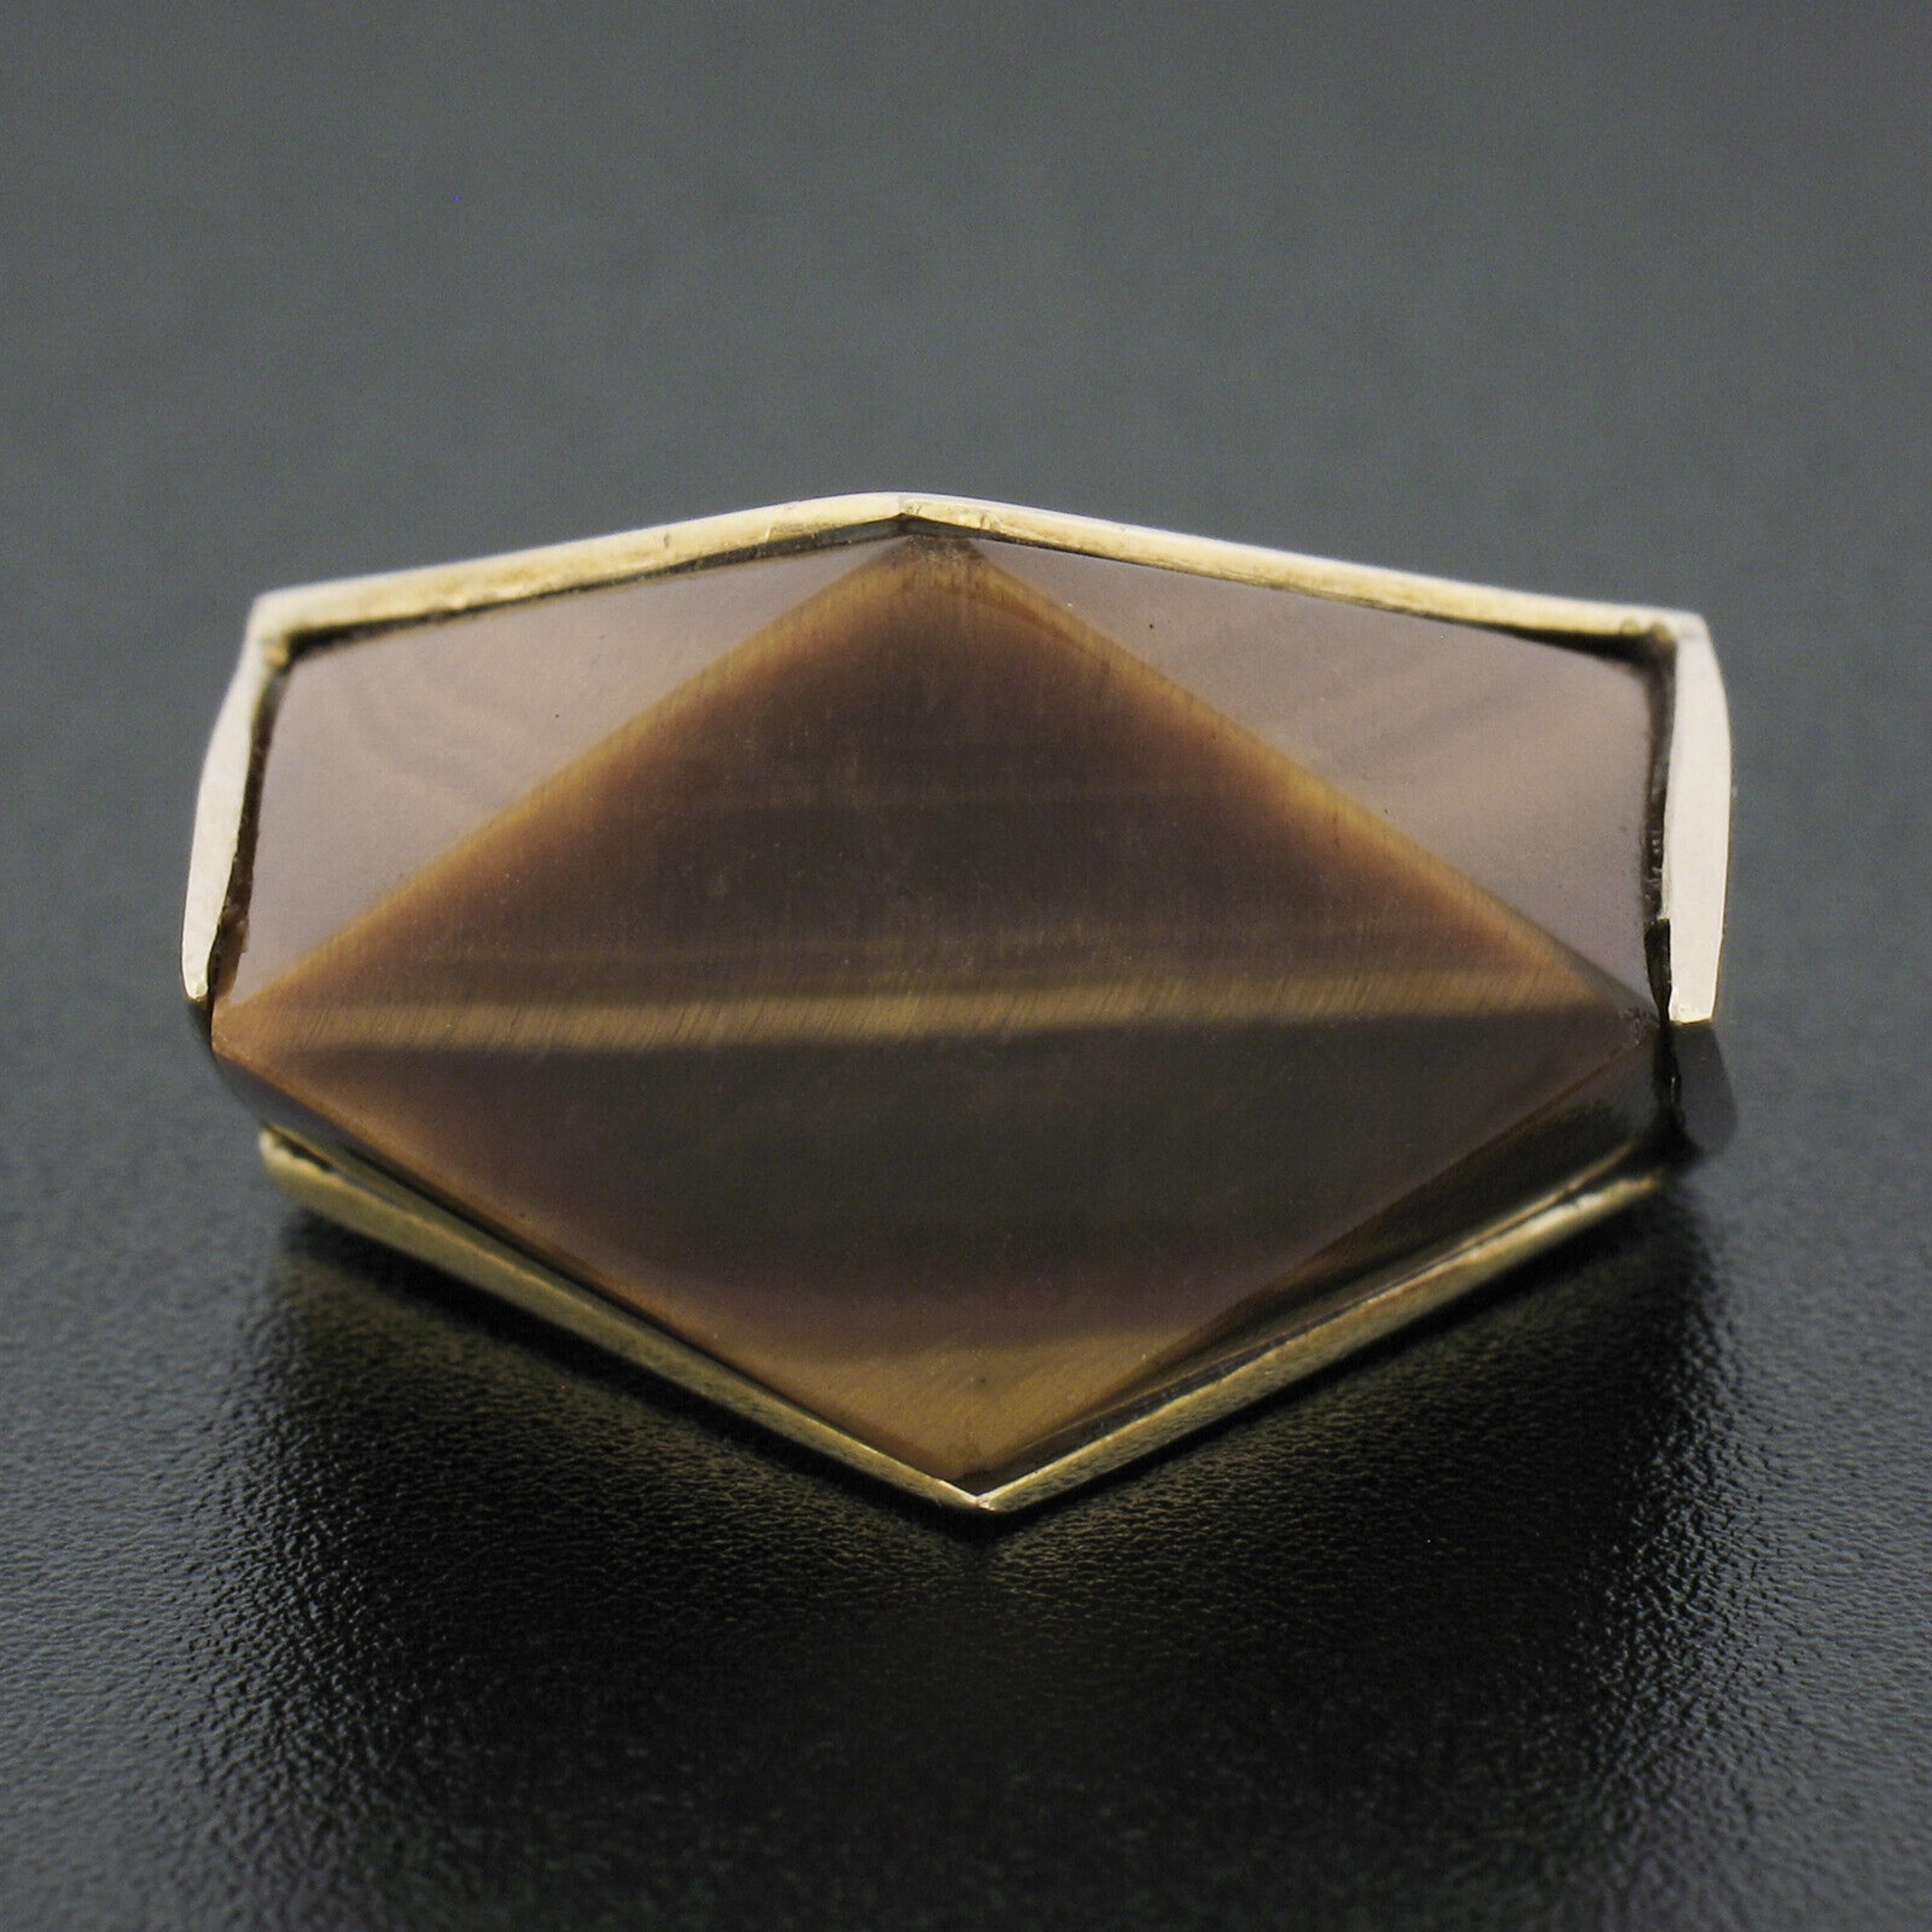 This solid and well made vintage statement ring was crafted in the 1960's from solid 14k yellow gold and features a wonderful, large, tigers eye stone with a unique geometric custom cut. This beautiful polished stone displays silky looking